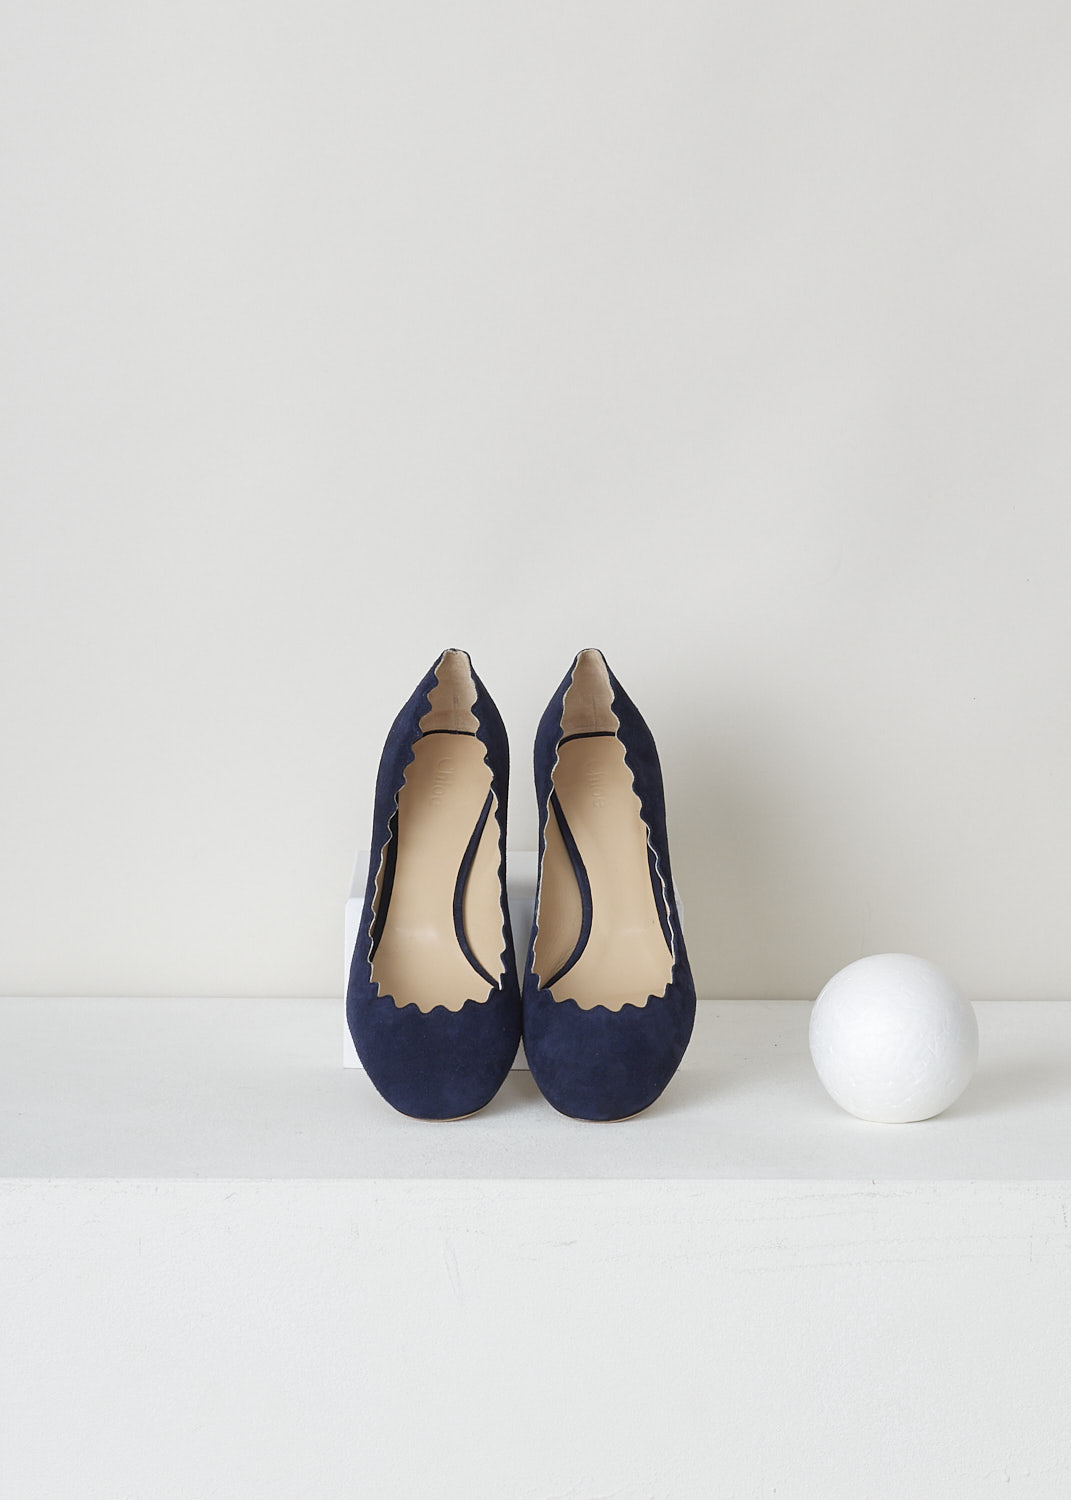 CHLOÃ‰, NAVY BLUE PUMPS WITH SCALLOPED TOPLINE, CH26230_702_BLUE_LAGOON, Blue, Top, Navy blue suede pumps featuring a chunky heel, round toe vamp and a scalloped top-line. 
